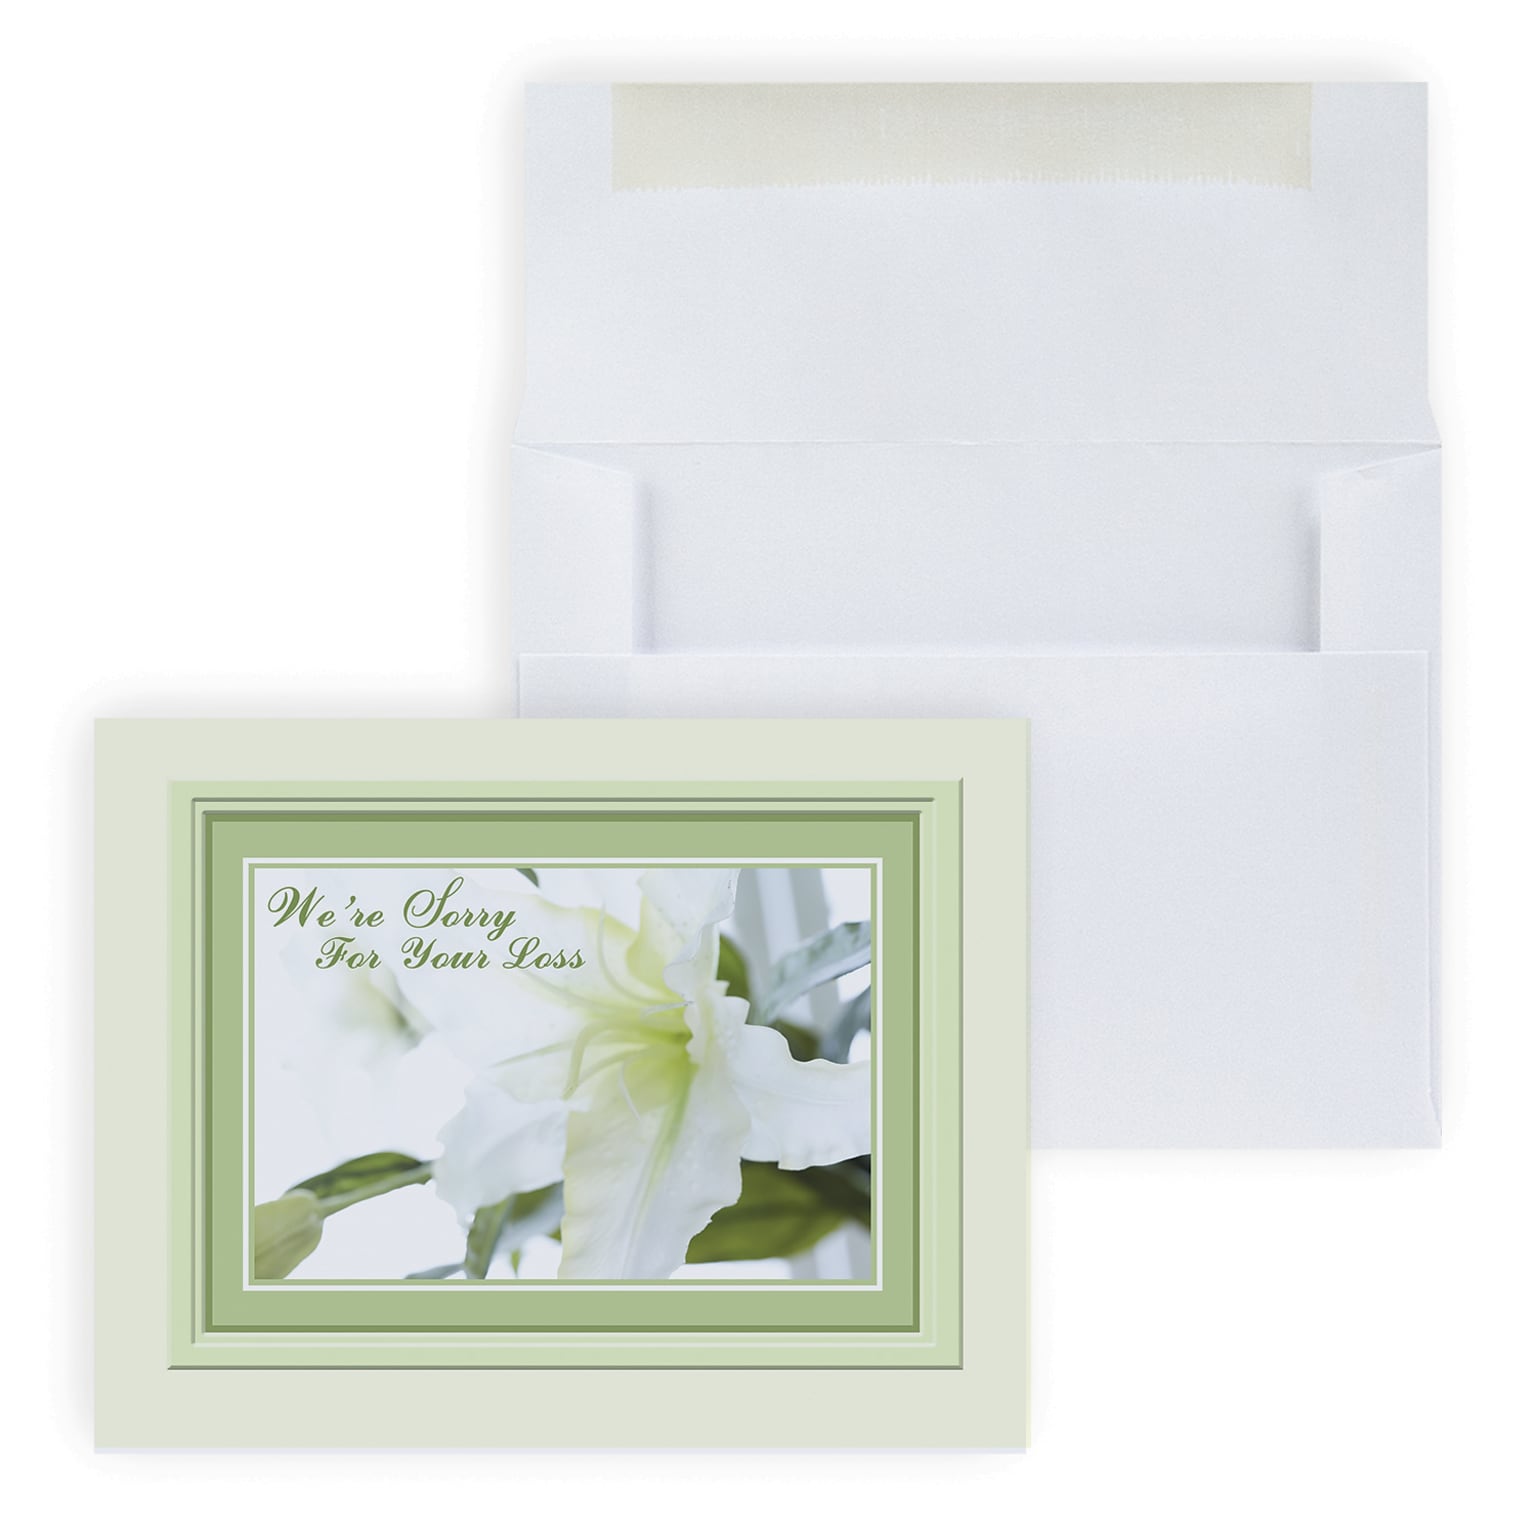 Custom Sorry for your Loss Sympathy Cards, With Envelopes, 6 x 4, 25 Cards per Set